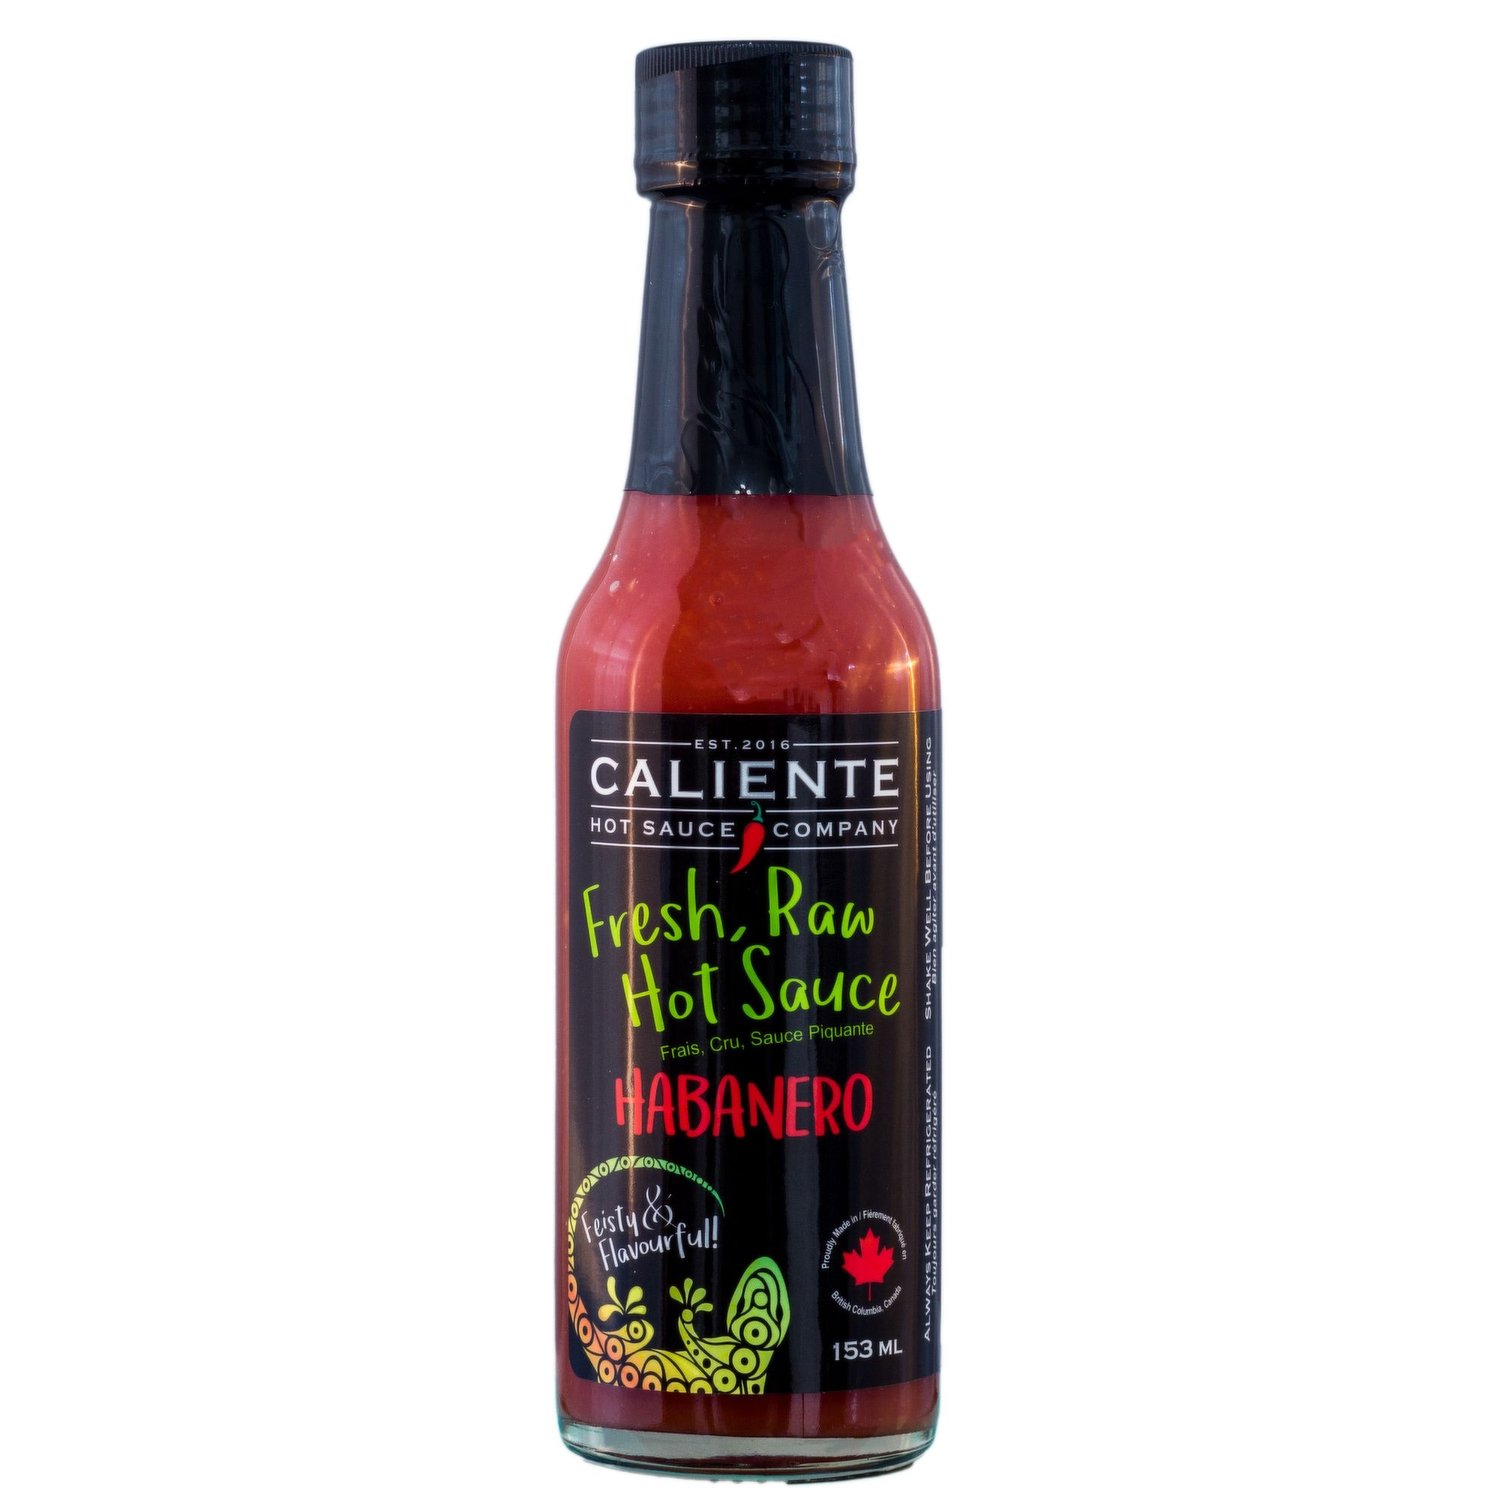 Buy Louisiana Brand The Original The Perfect Hot Sauce - it's vegetarian,  pescatarian, vegan , climate-friendly & plant-based